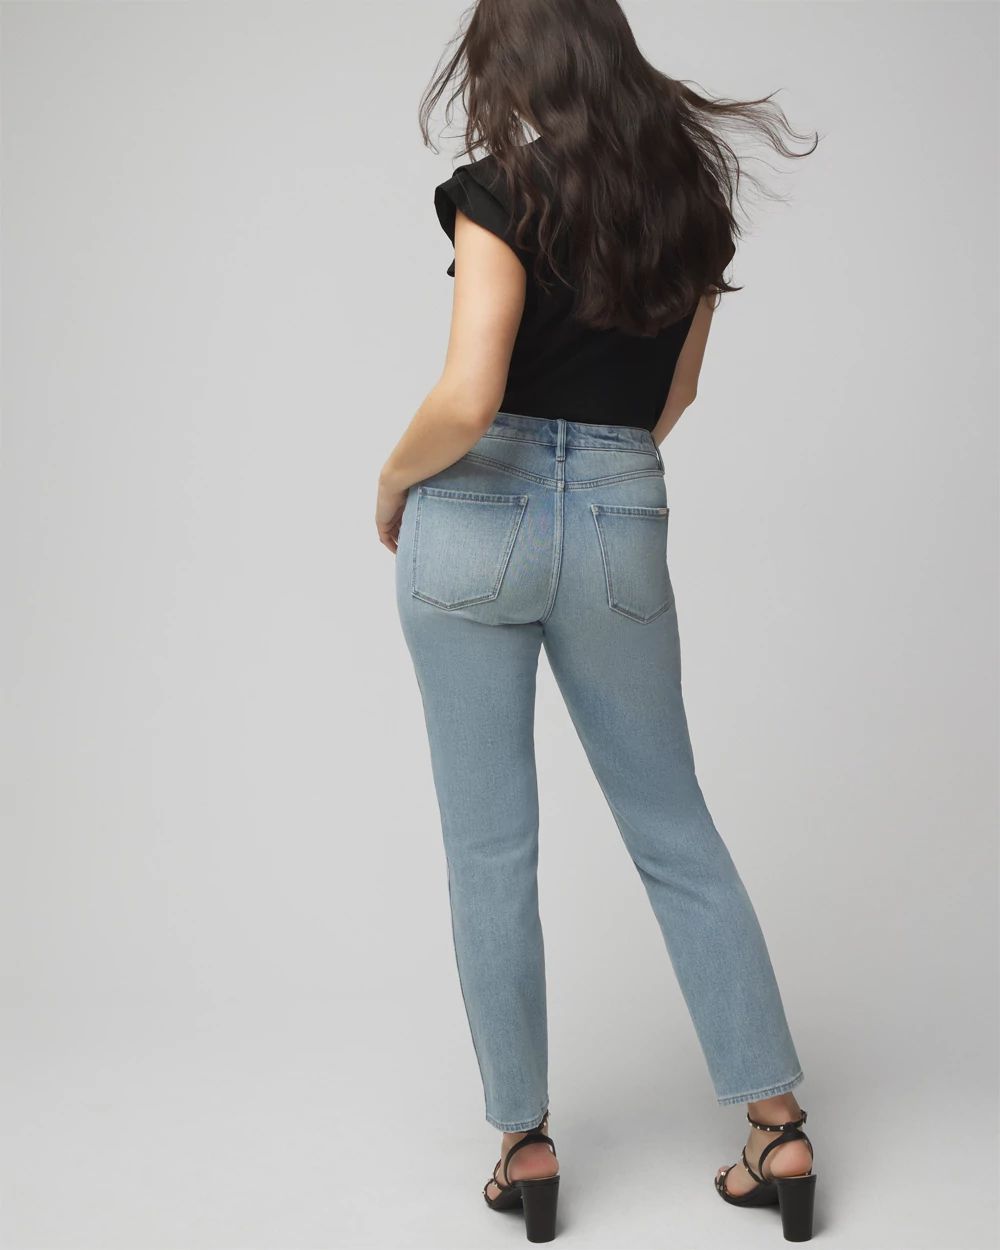 Curvy High-Rise Straight Jeans click to view larger image.